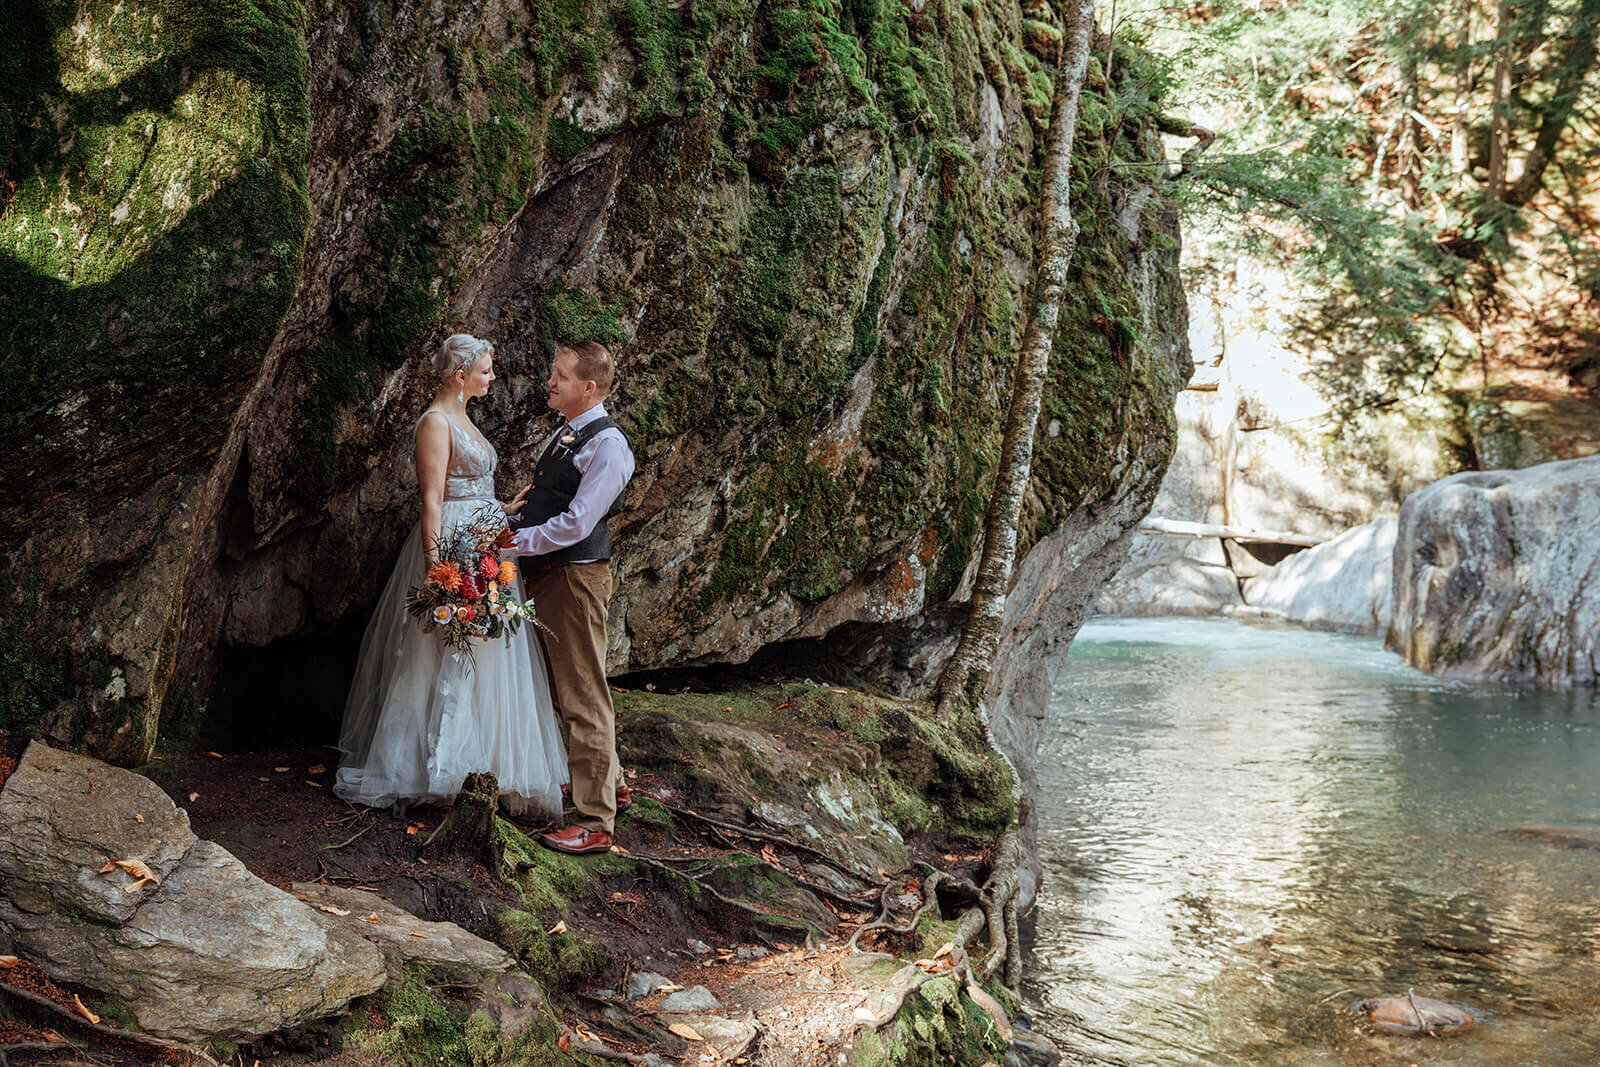  Bride and groom check out the Mad River after eloping at Warren Falls in Vermont 